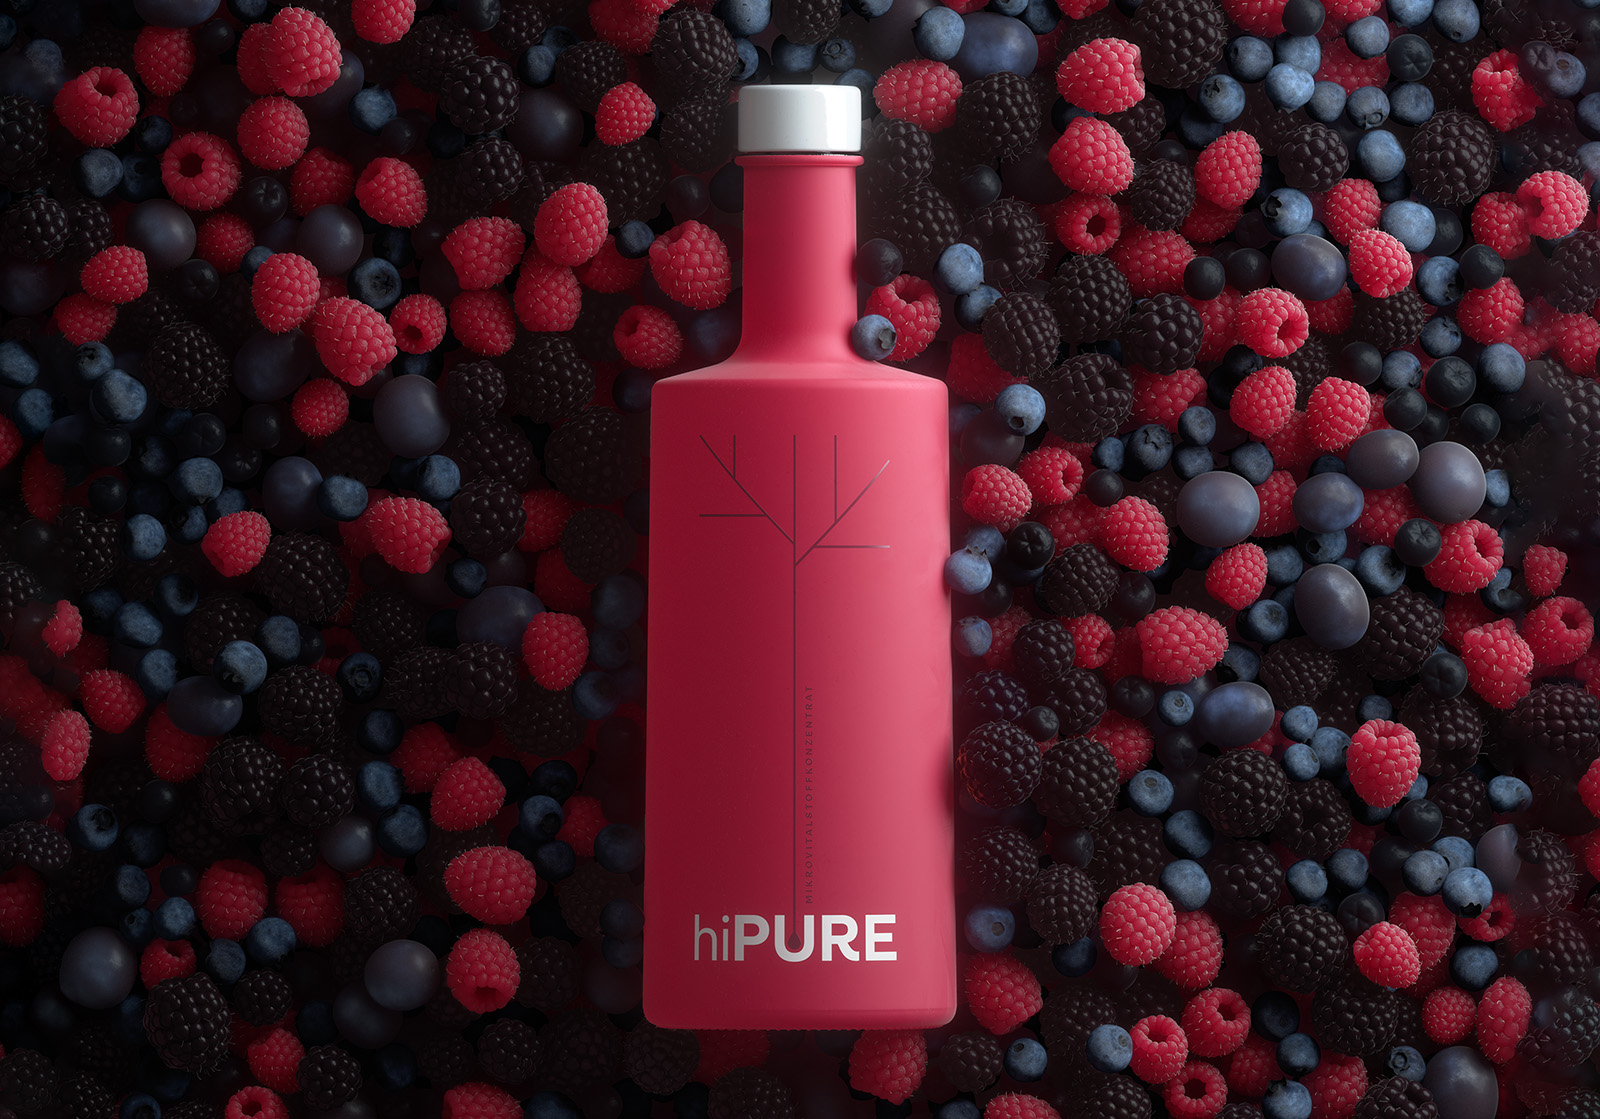 hiPURE Branding and Packaging Design